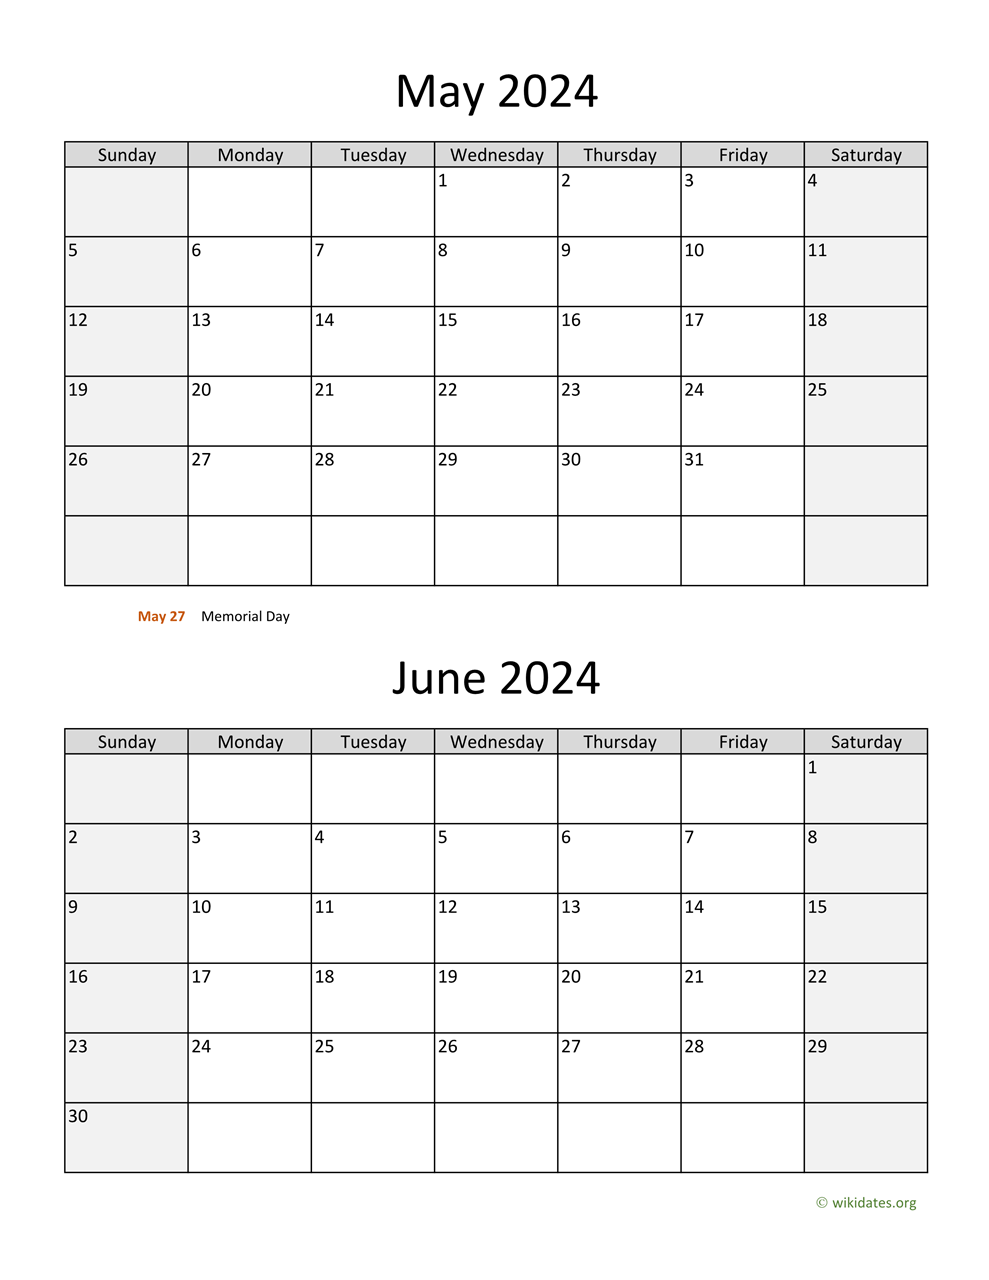 May and June 2024 Calendar  WikiDates.org